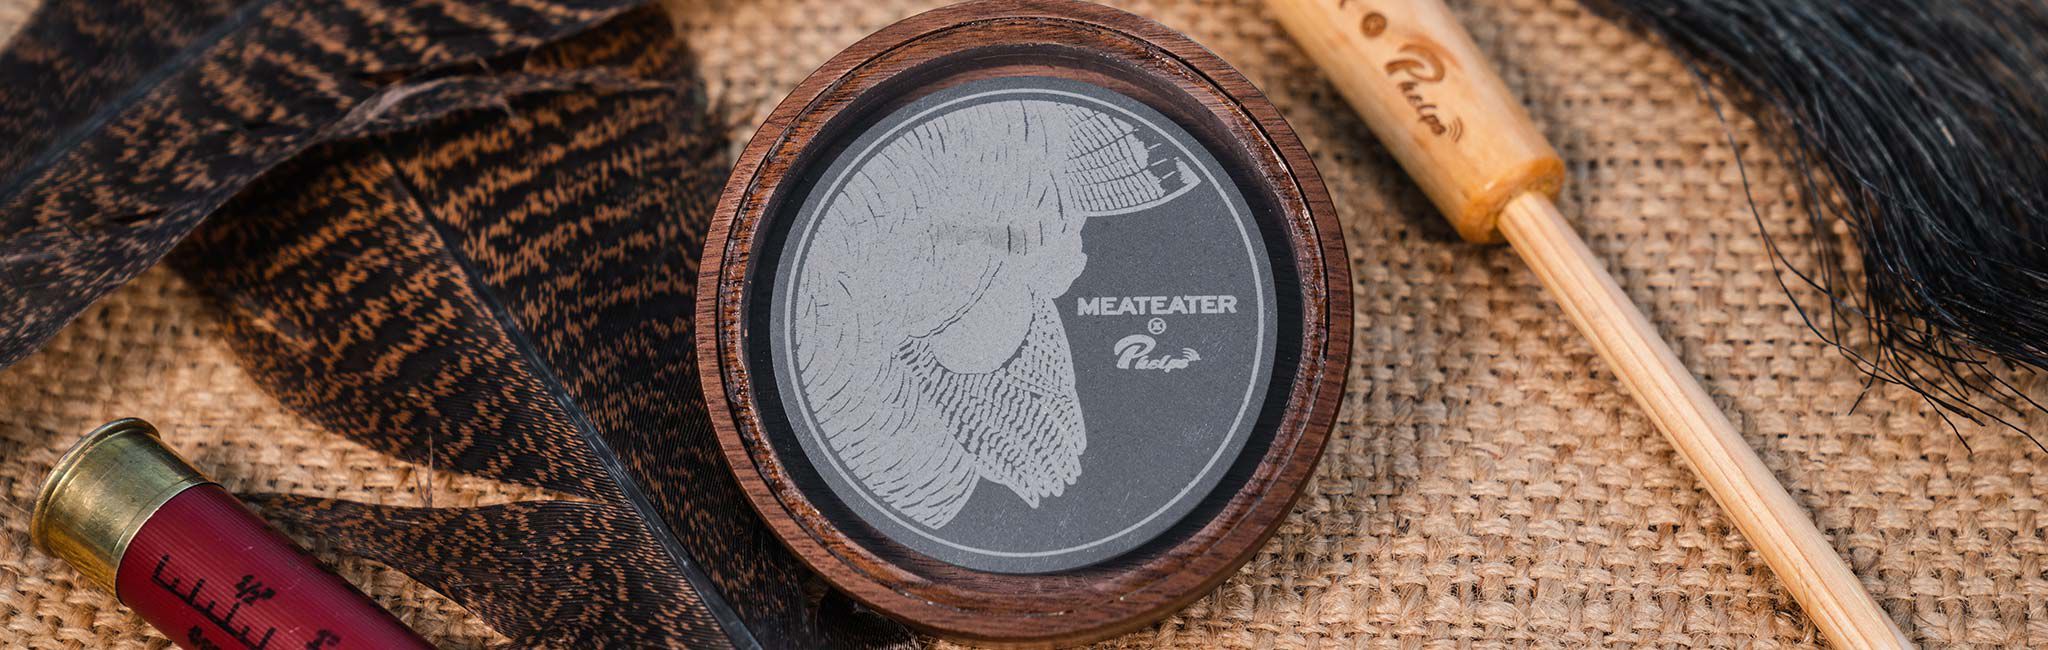 MeatEater x Phelps Calls